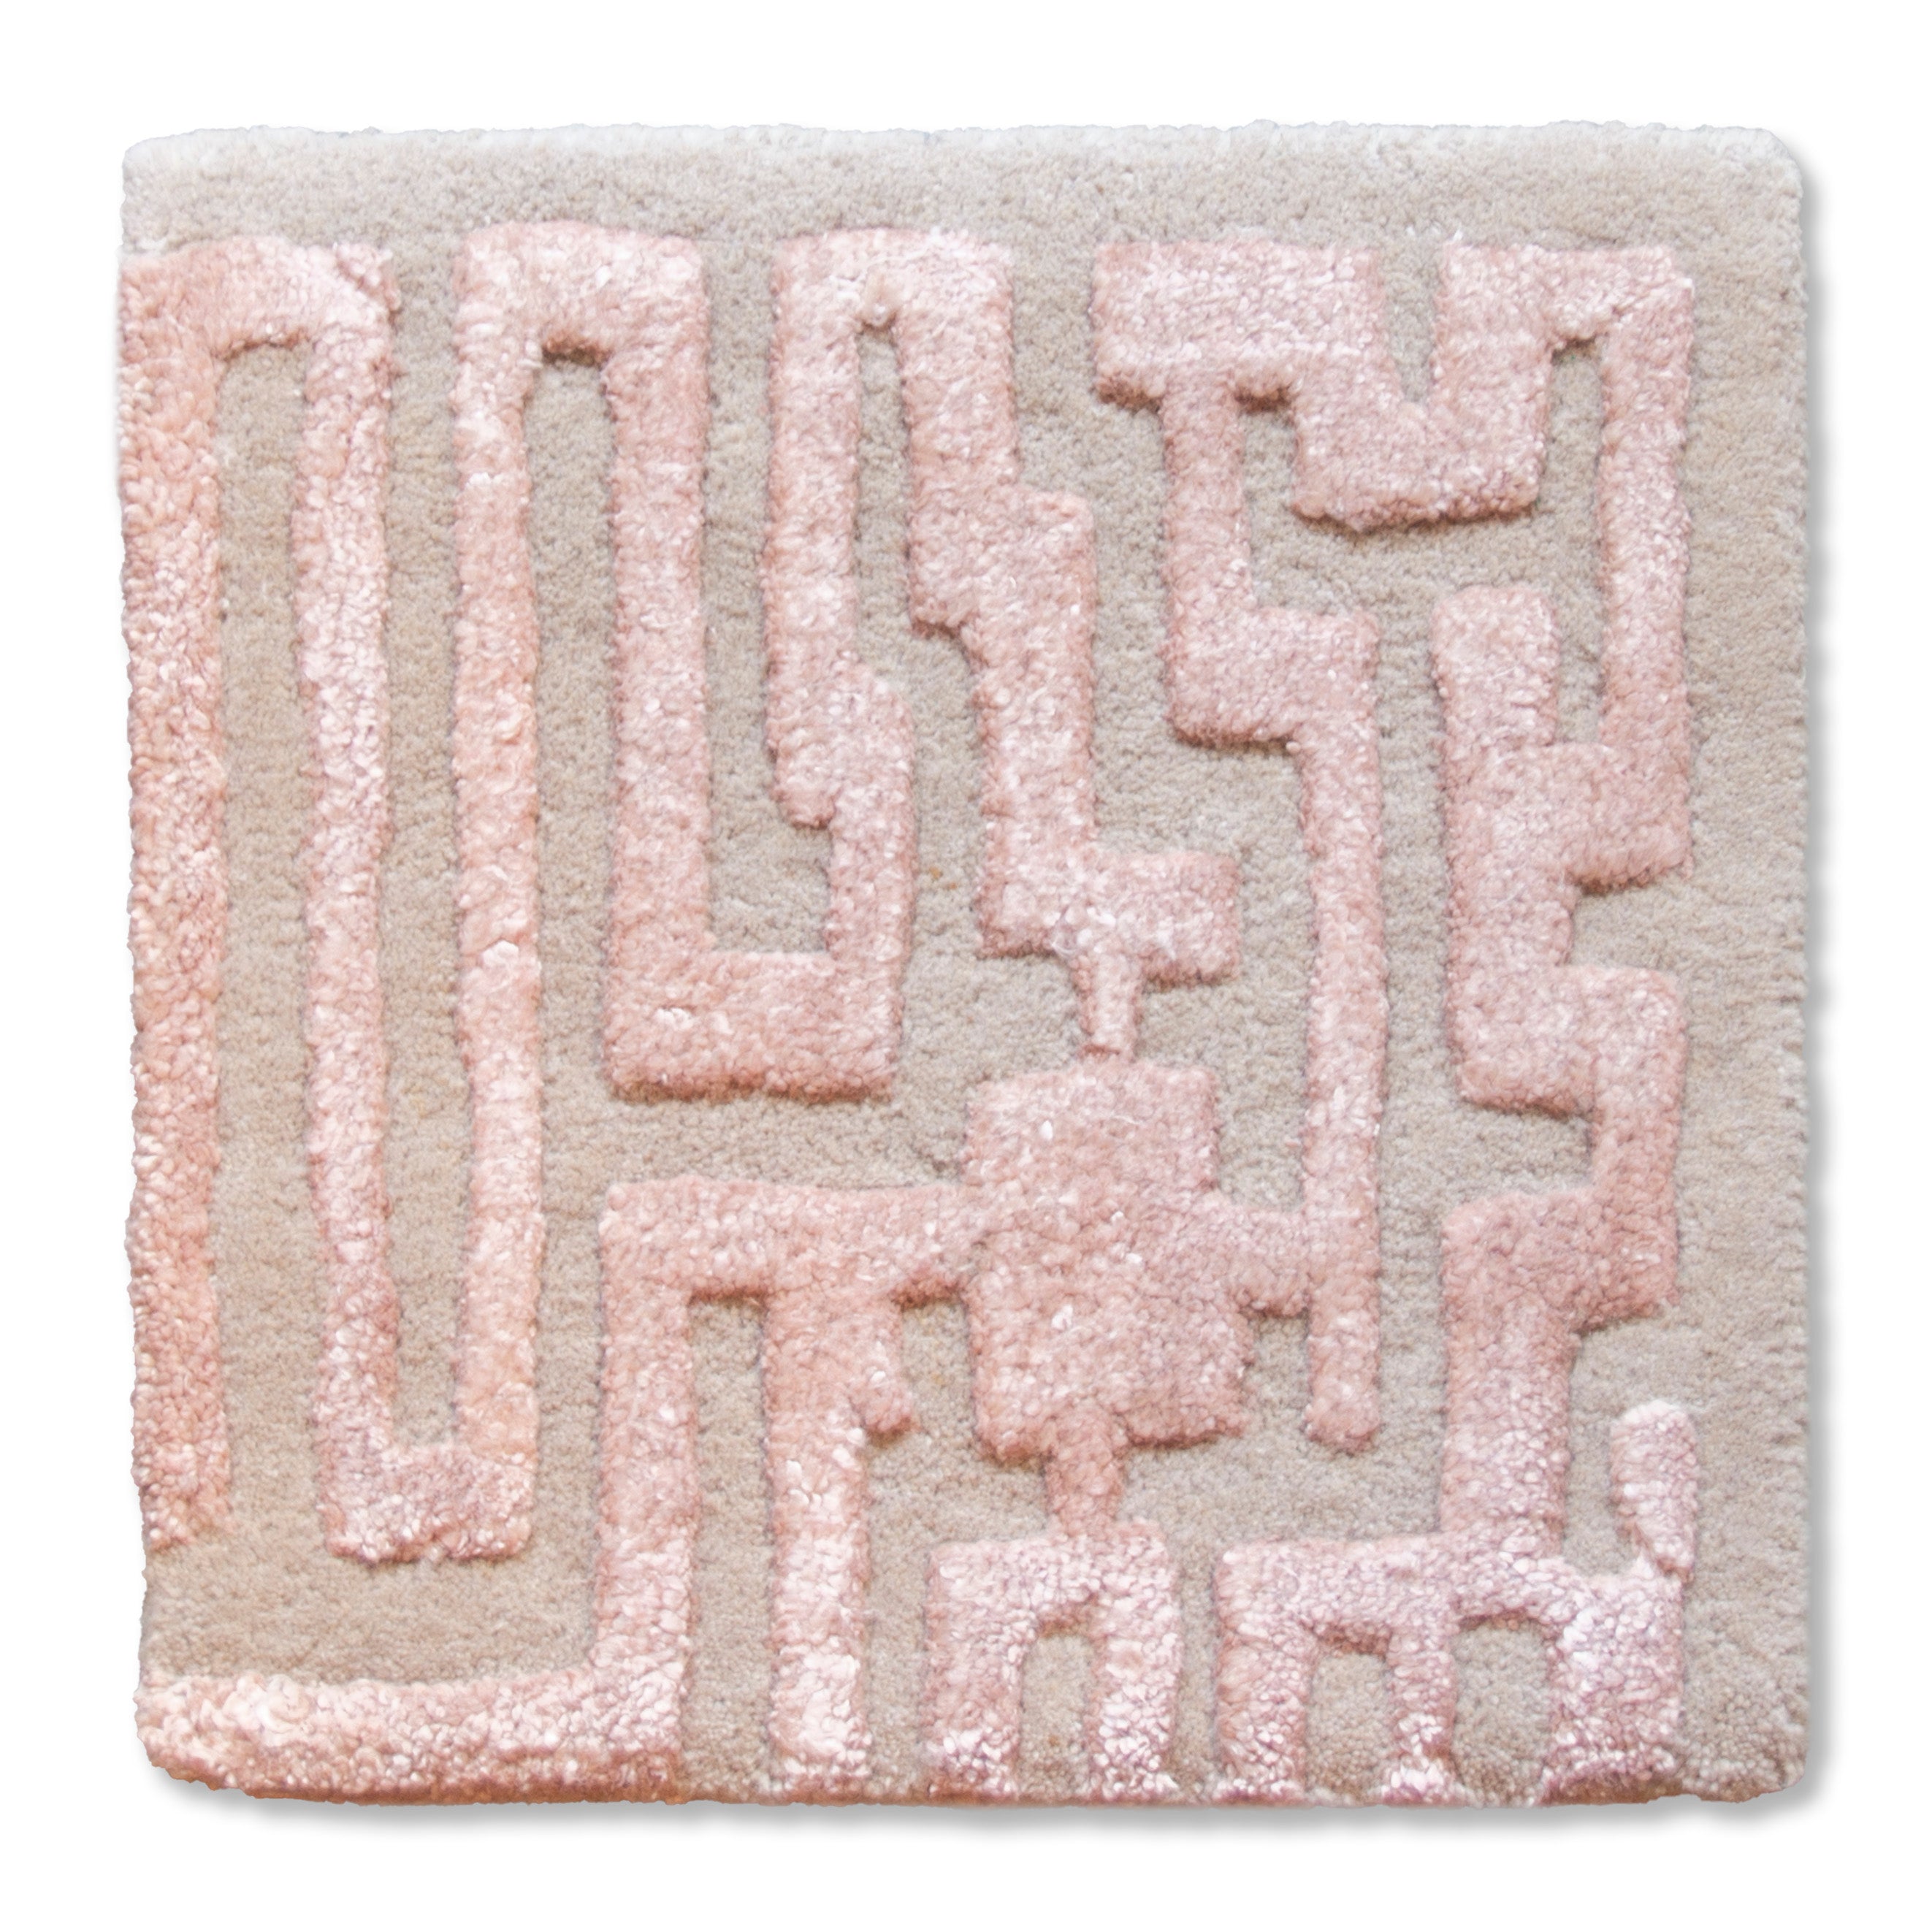 Theseus Hand-Tufted Maze Rug by Kevin Francis Design | Luxury Home Decor